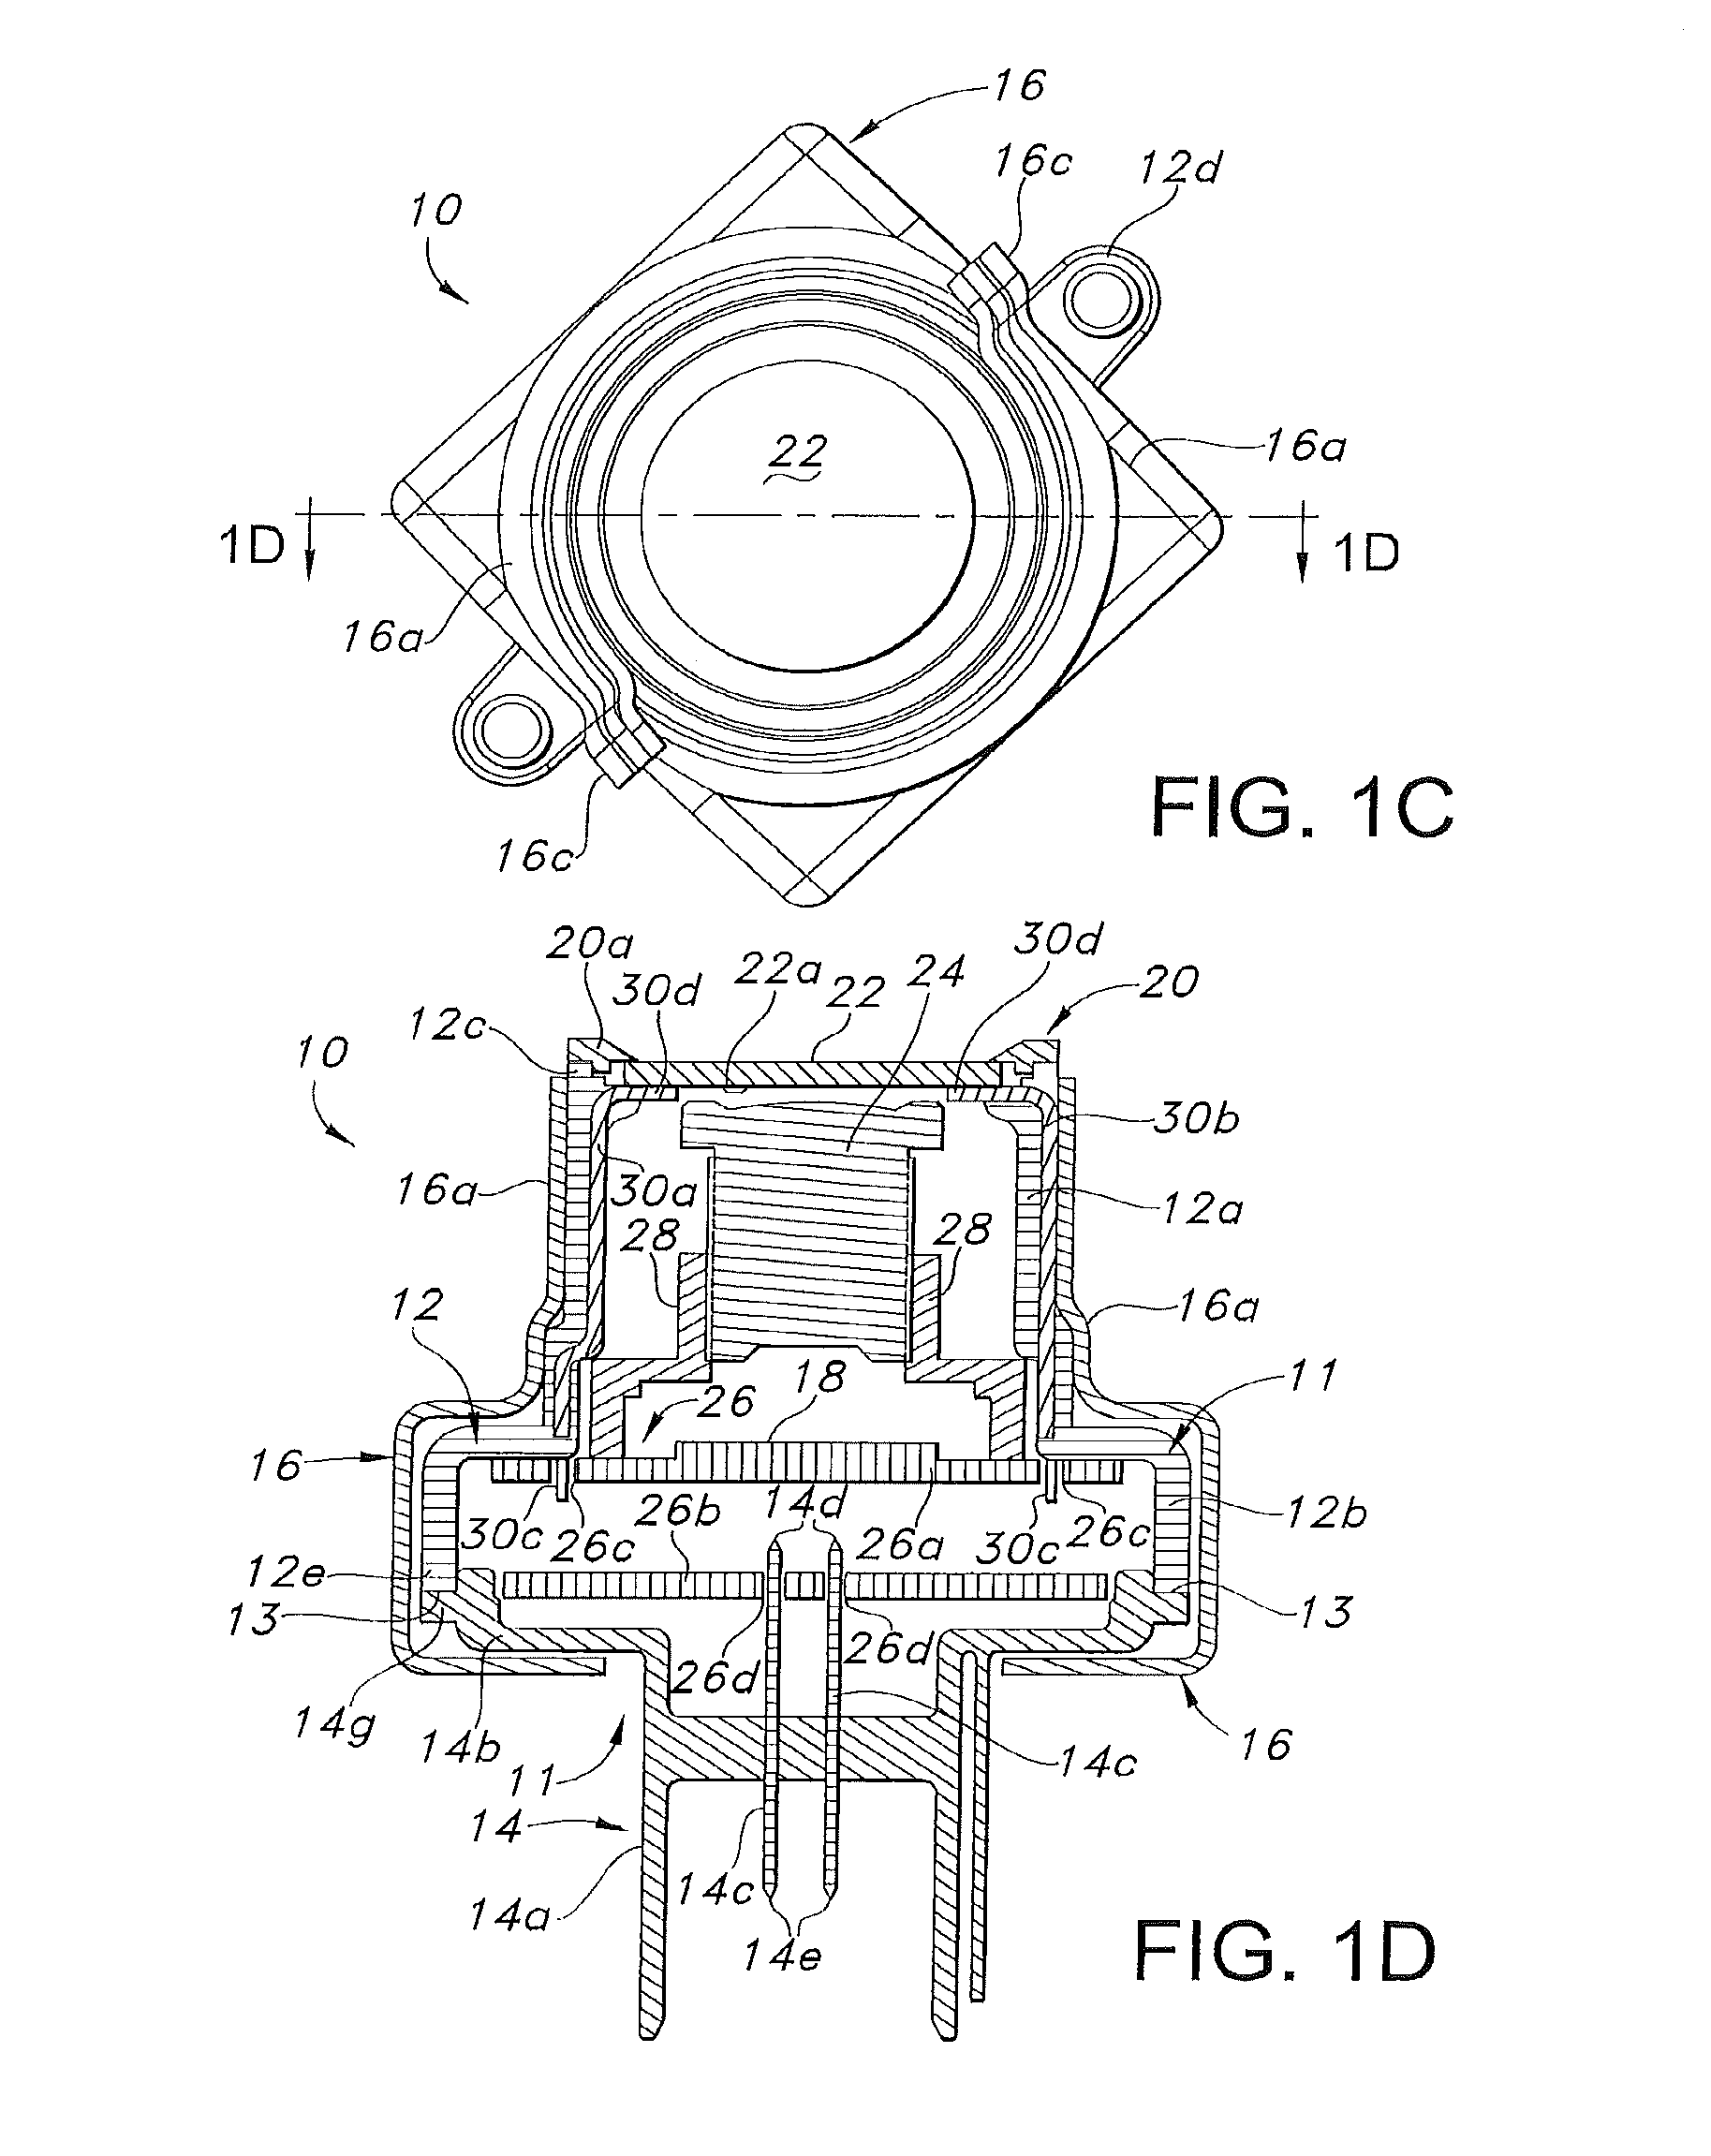 Integrated automotive system, nozzle assembly and remote control method for cleaning an image sensor's exterior or objective lens surface